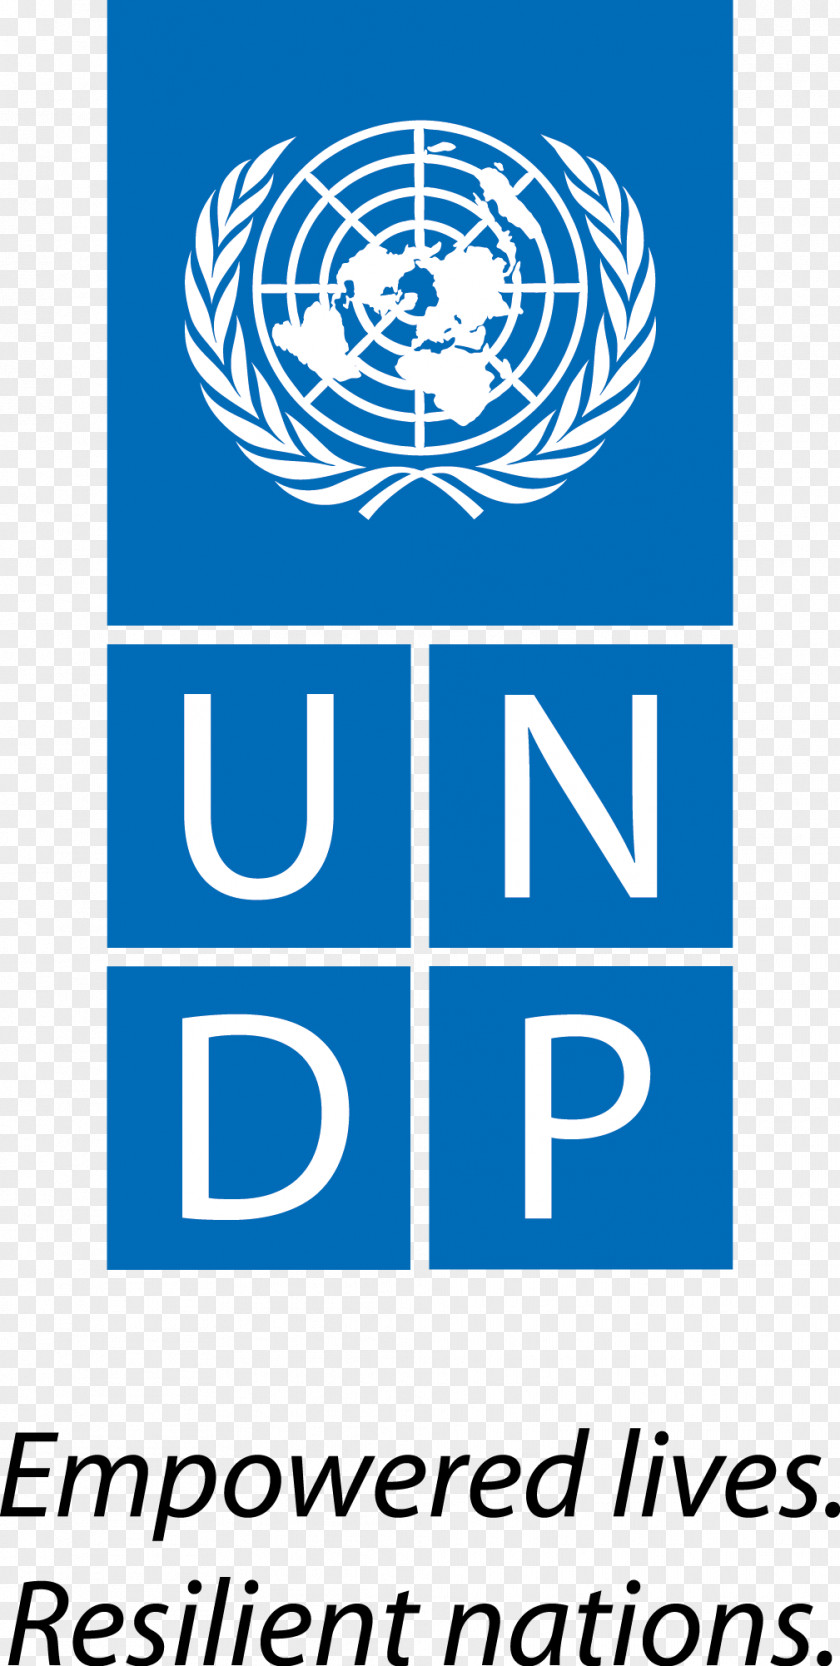 United Nations Development Programme Global Environment Facility Resident Coordinator Organization PNG